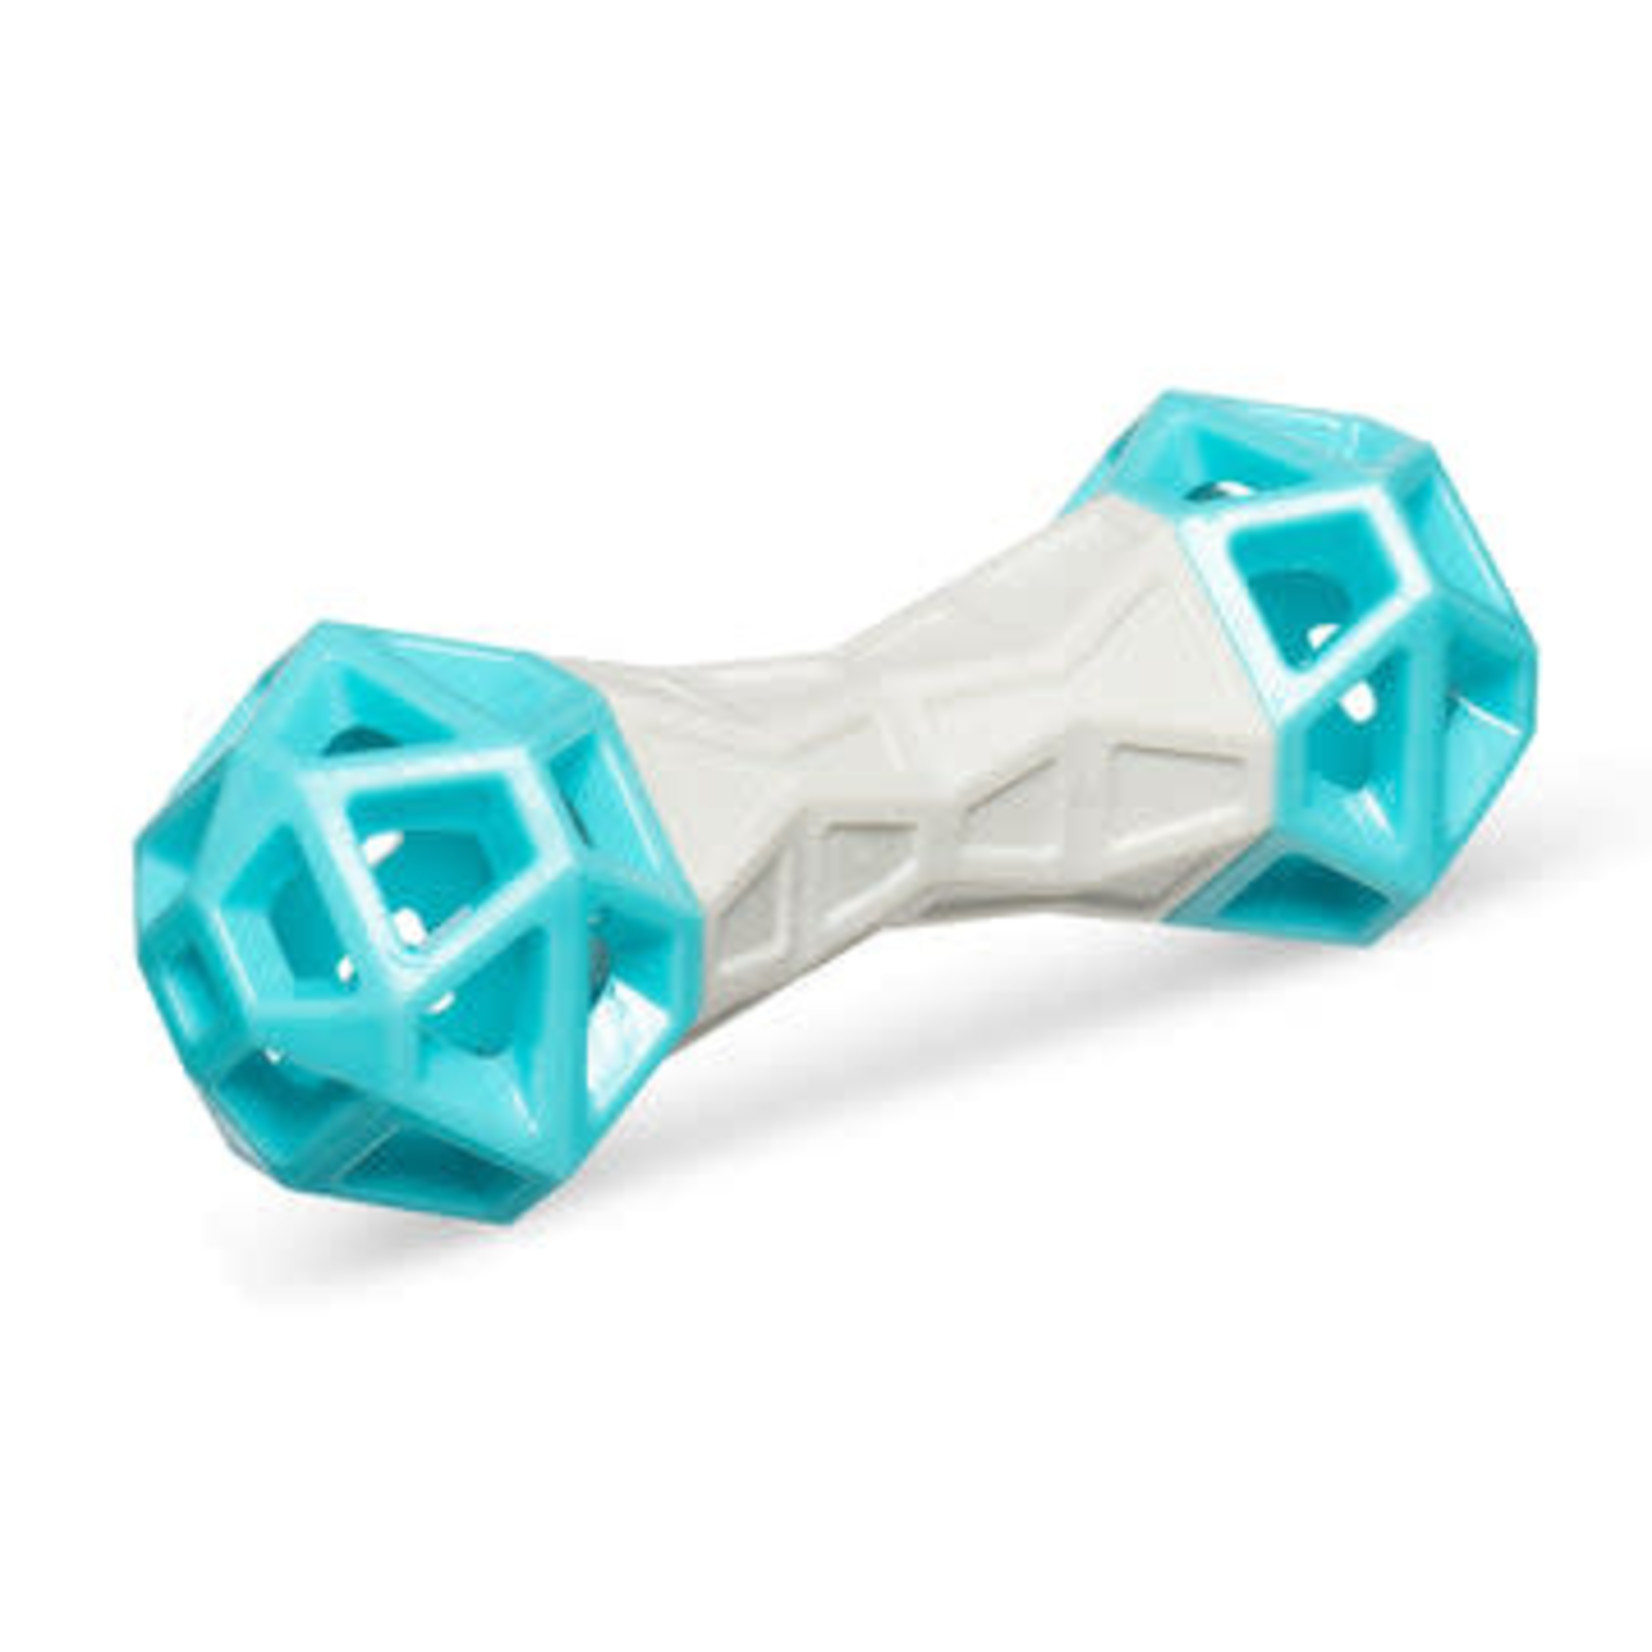 MESSY MUTTS Totally Pooched Flex n' Squeak Rubber Toy 7", Grey/Teal